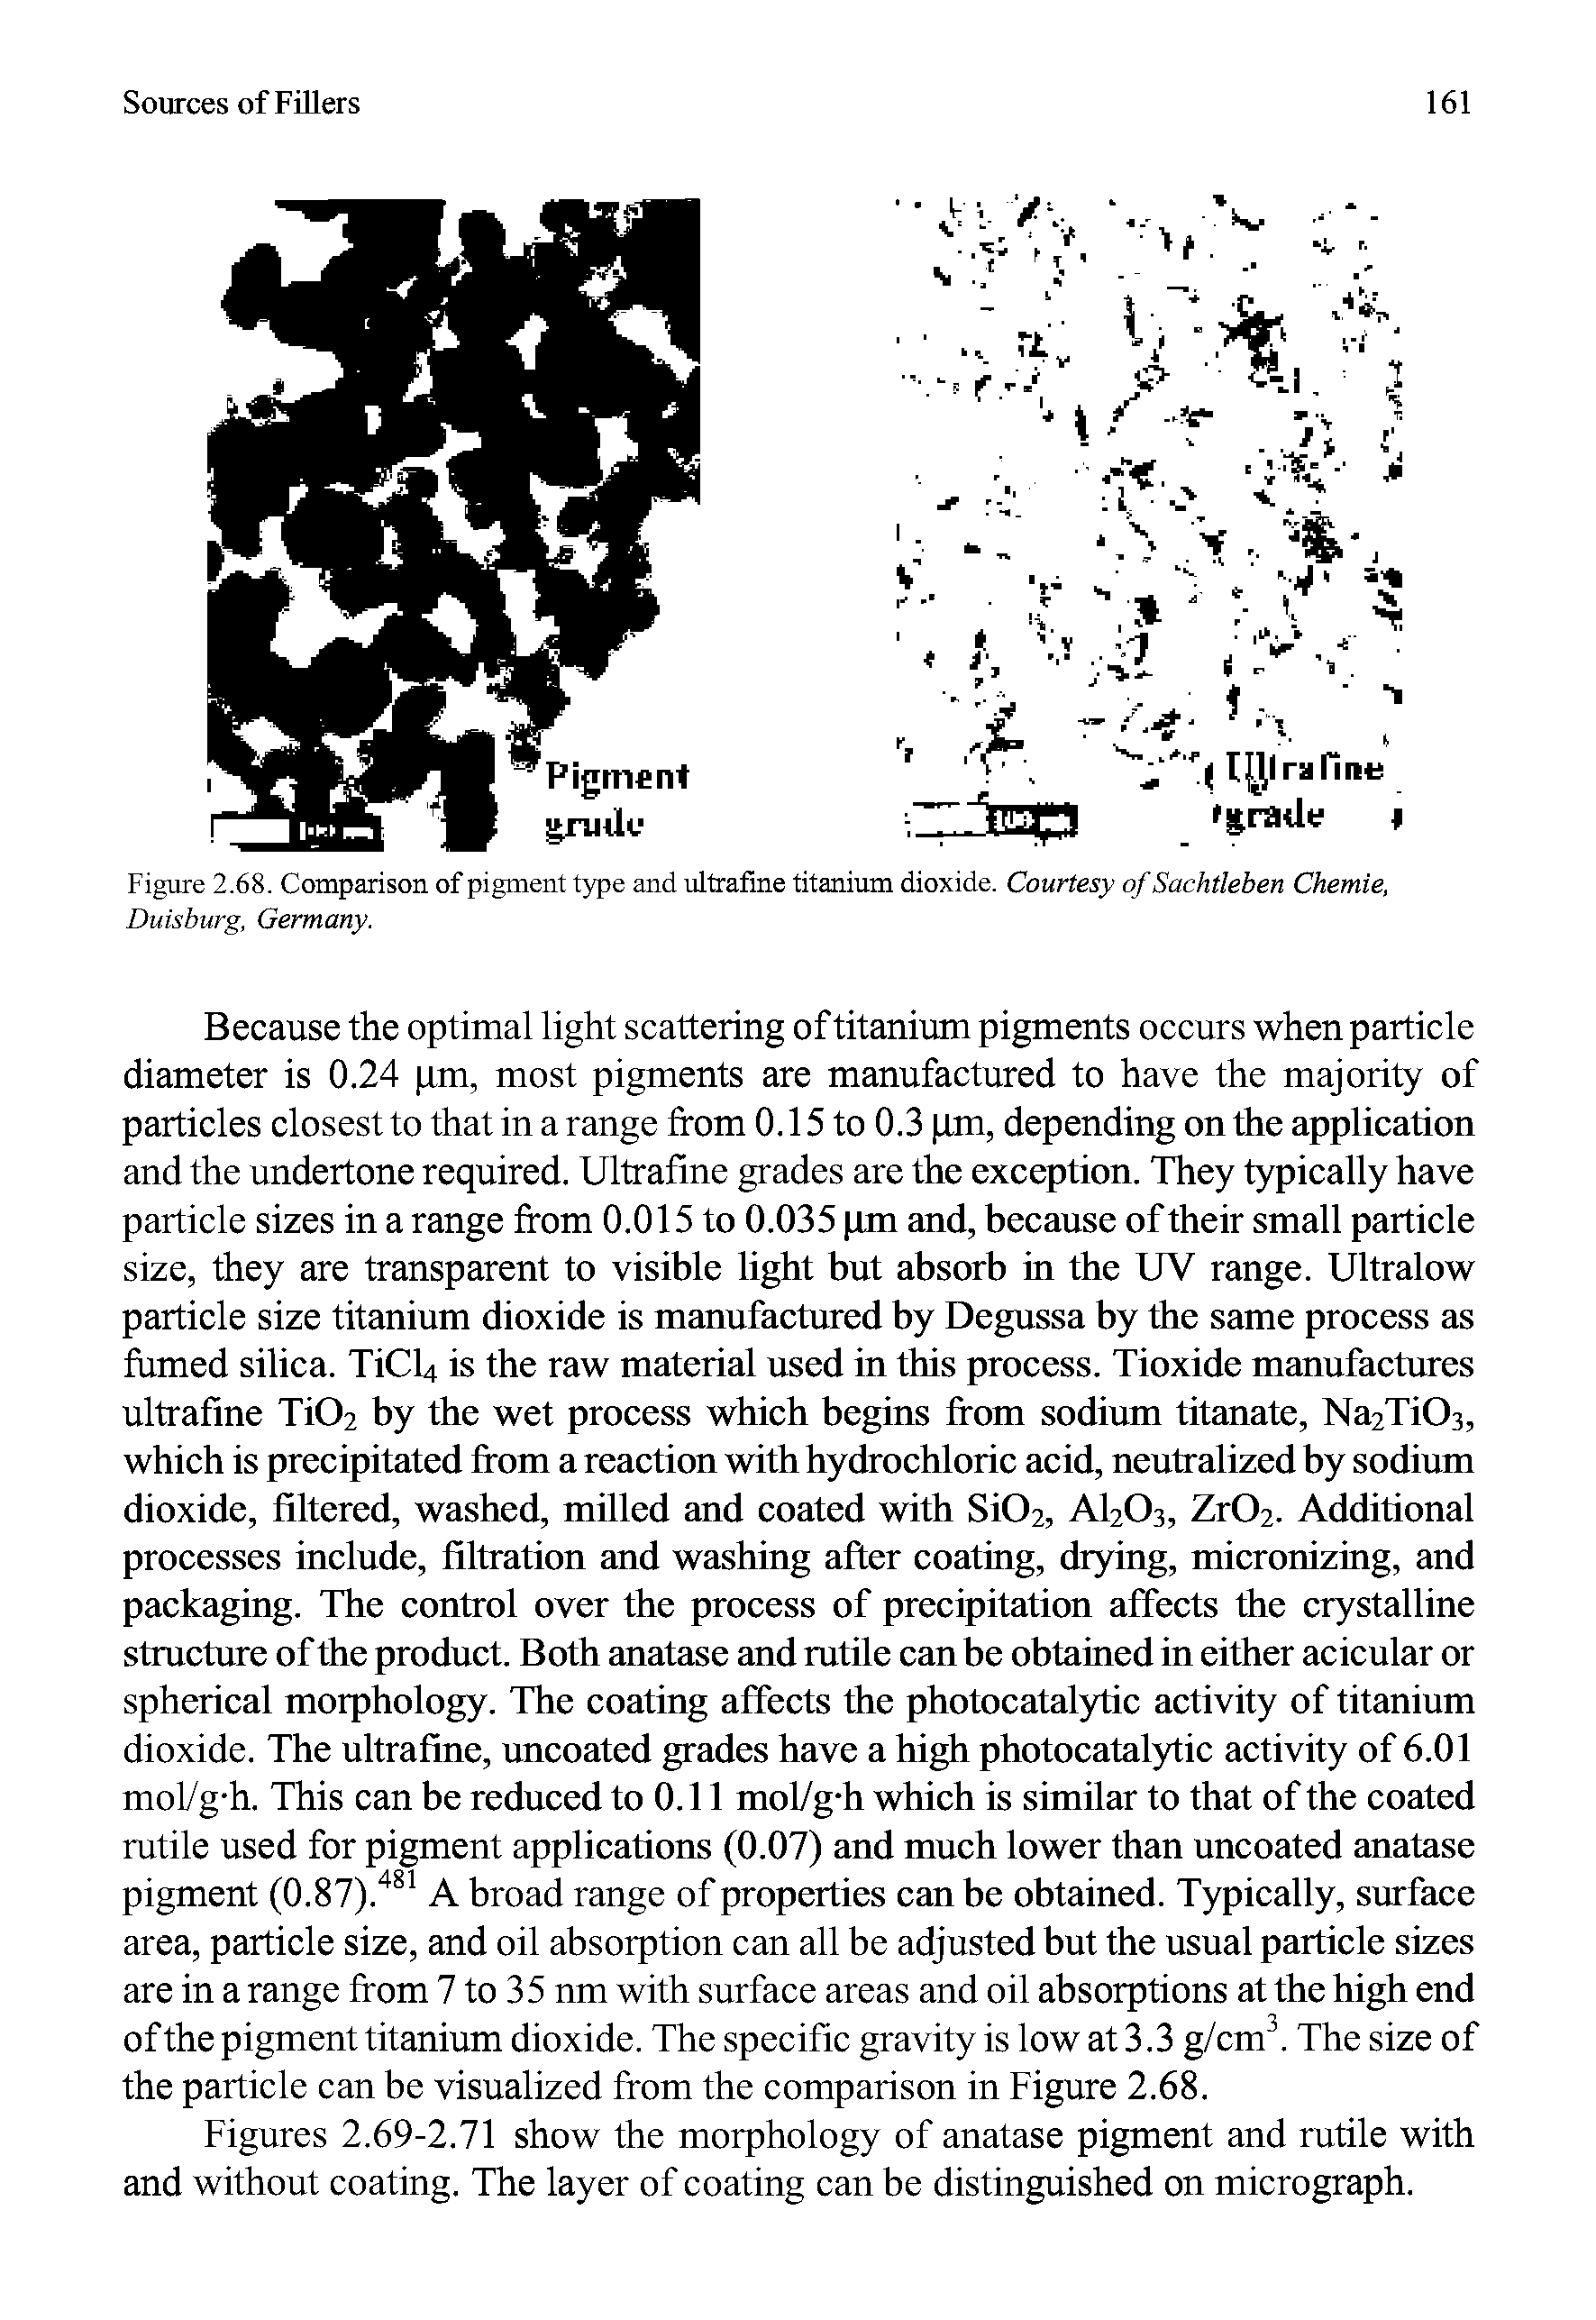 Figures 2.69-2.71 show the morphology of anatase pigment and rutile with and without coating. The layer of coating can be distinguished on micrograph.